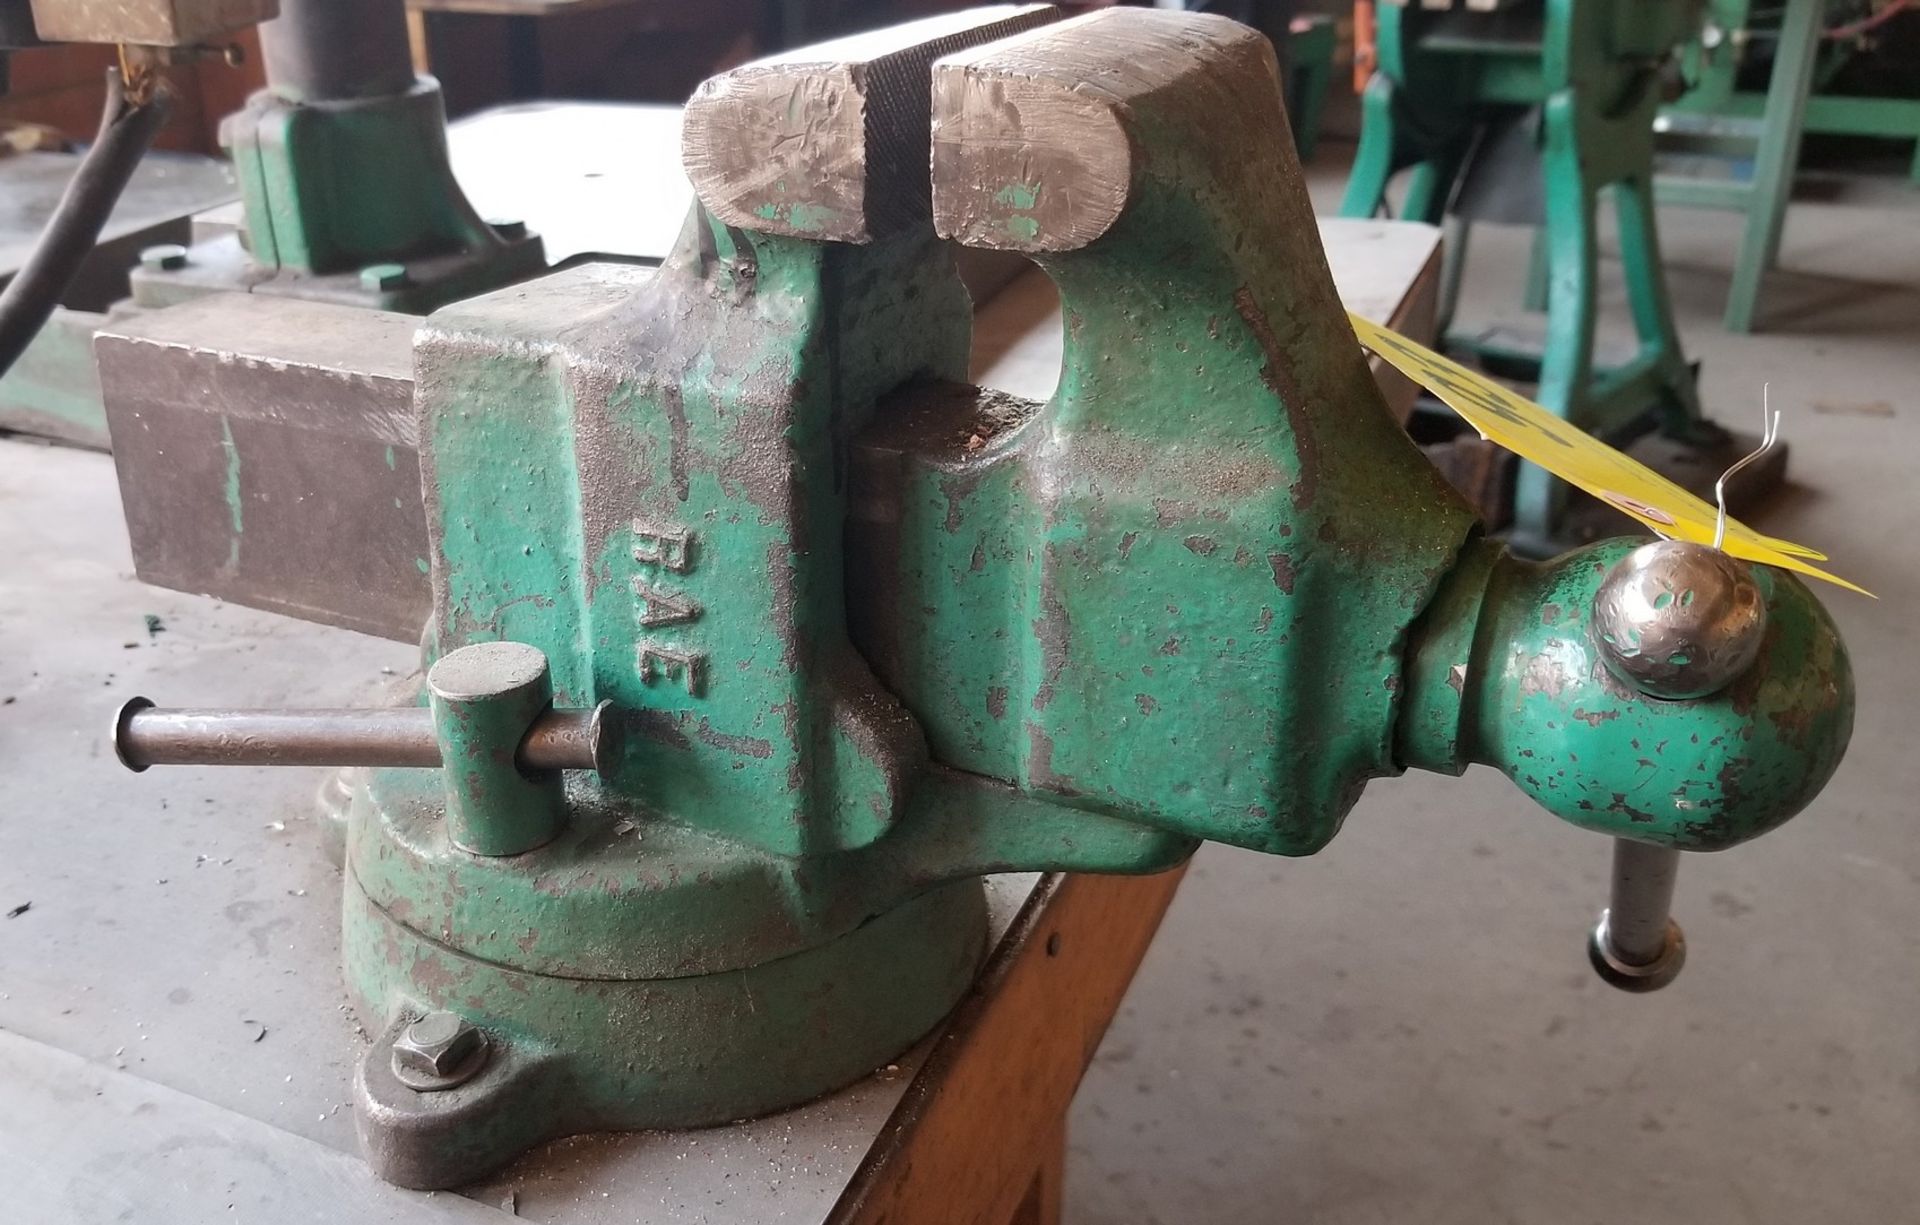 4 INCH BENCH VISE W/ 82L" X 63"W X 33"H SHOP TABLE (NO CONTENTS) - Image 2 of 2